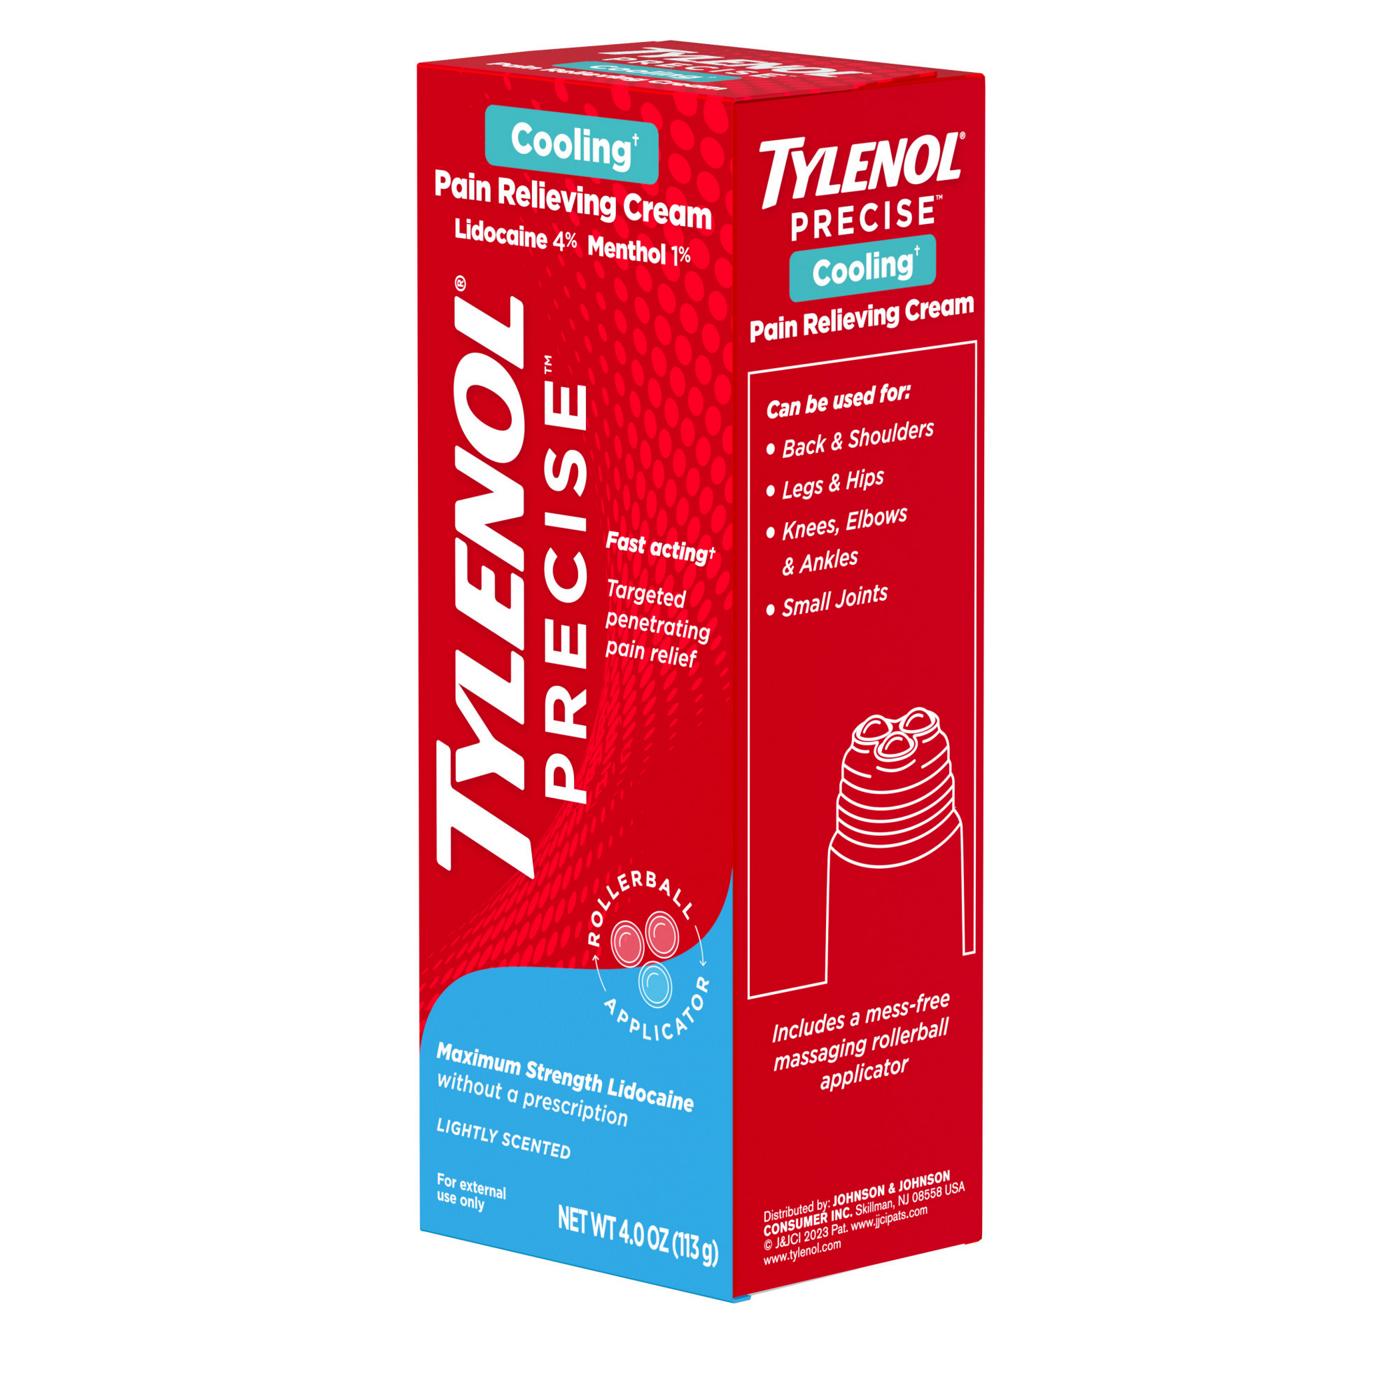 Tylenol Precise Cooling Pain Relieving Cream; image 3 of 6